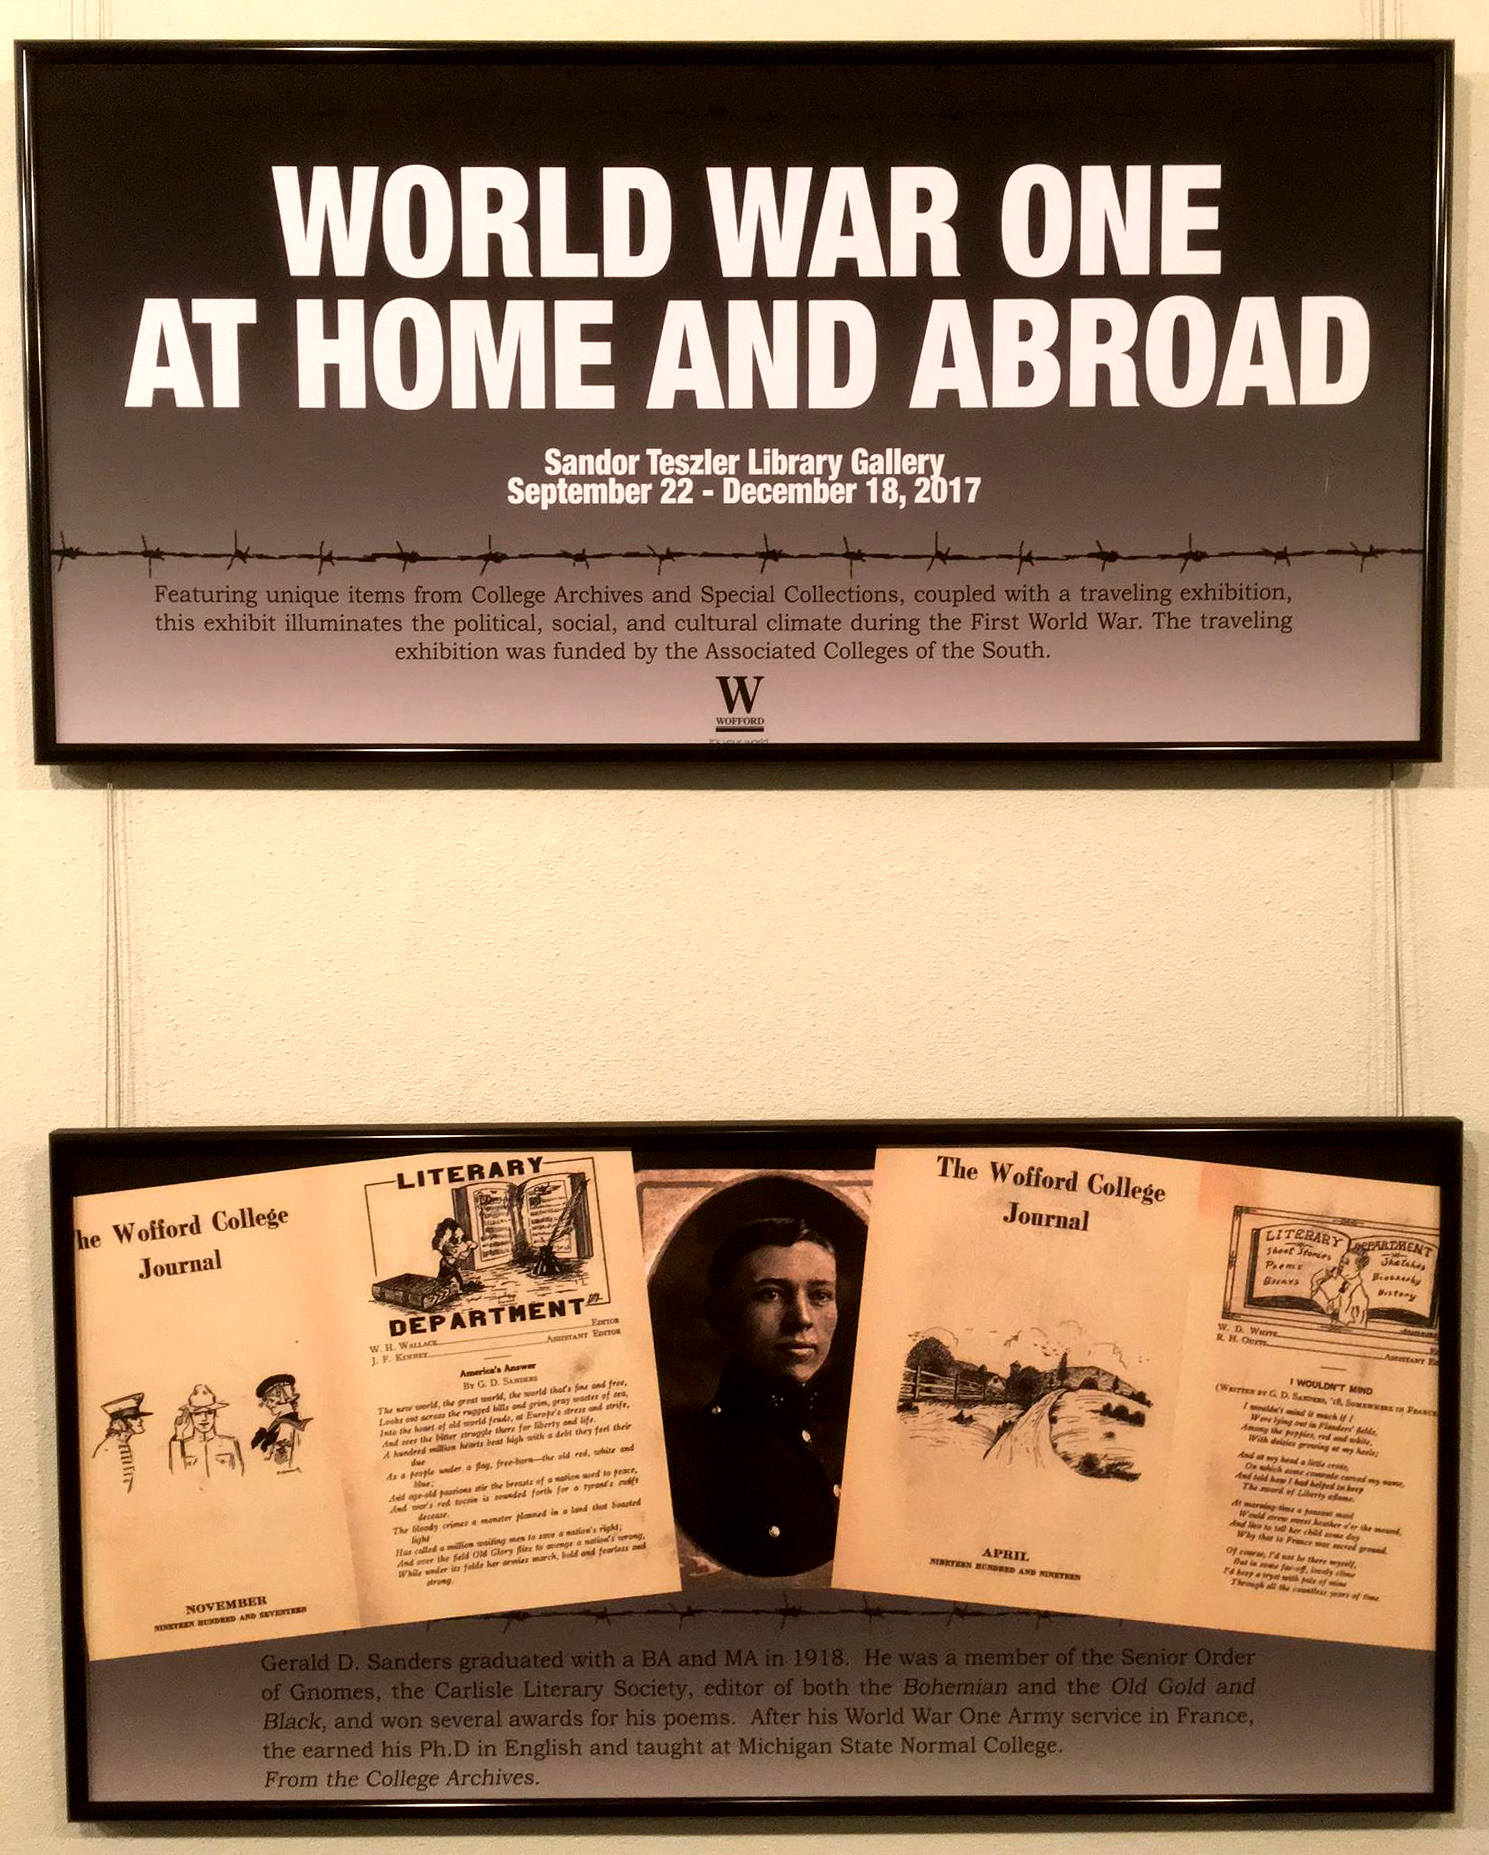 World War One: At Home and Abroad exhibit title and Gerald Sanders panels